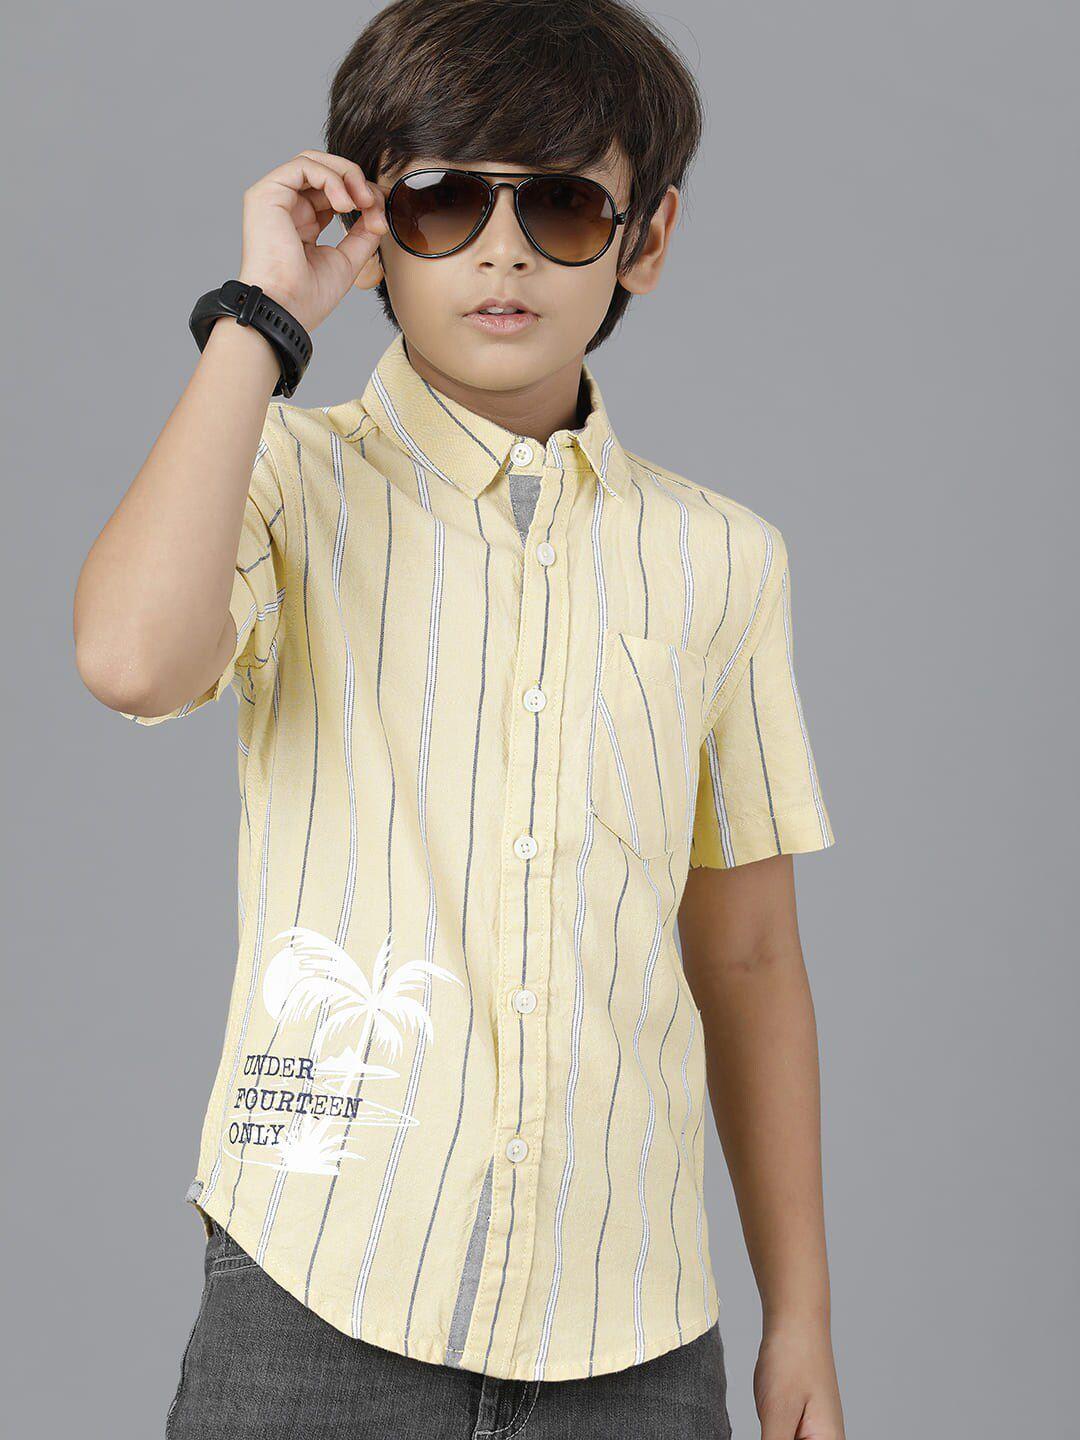 under fourteen only boys striped casual cotton shirt